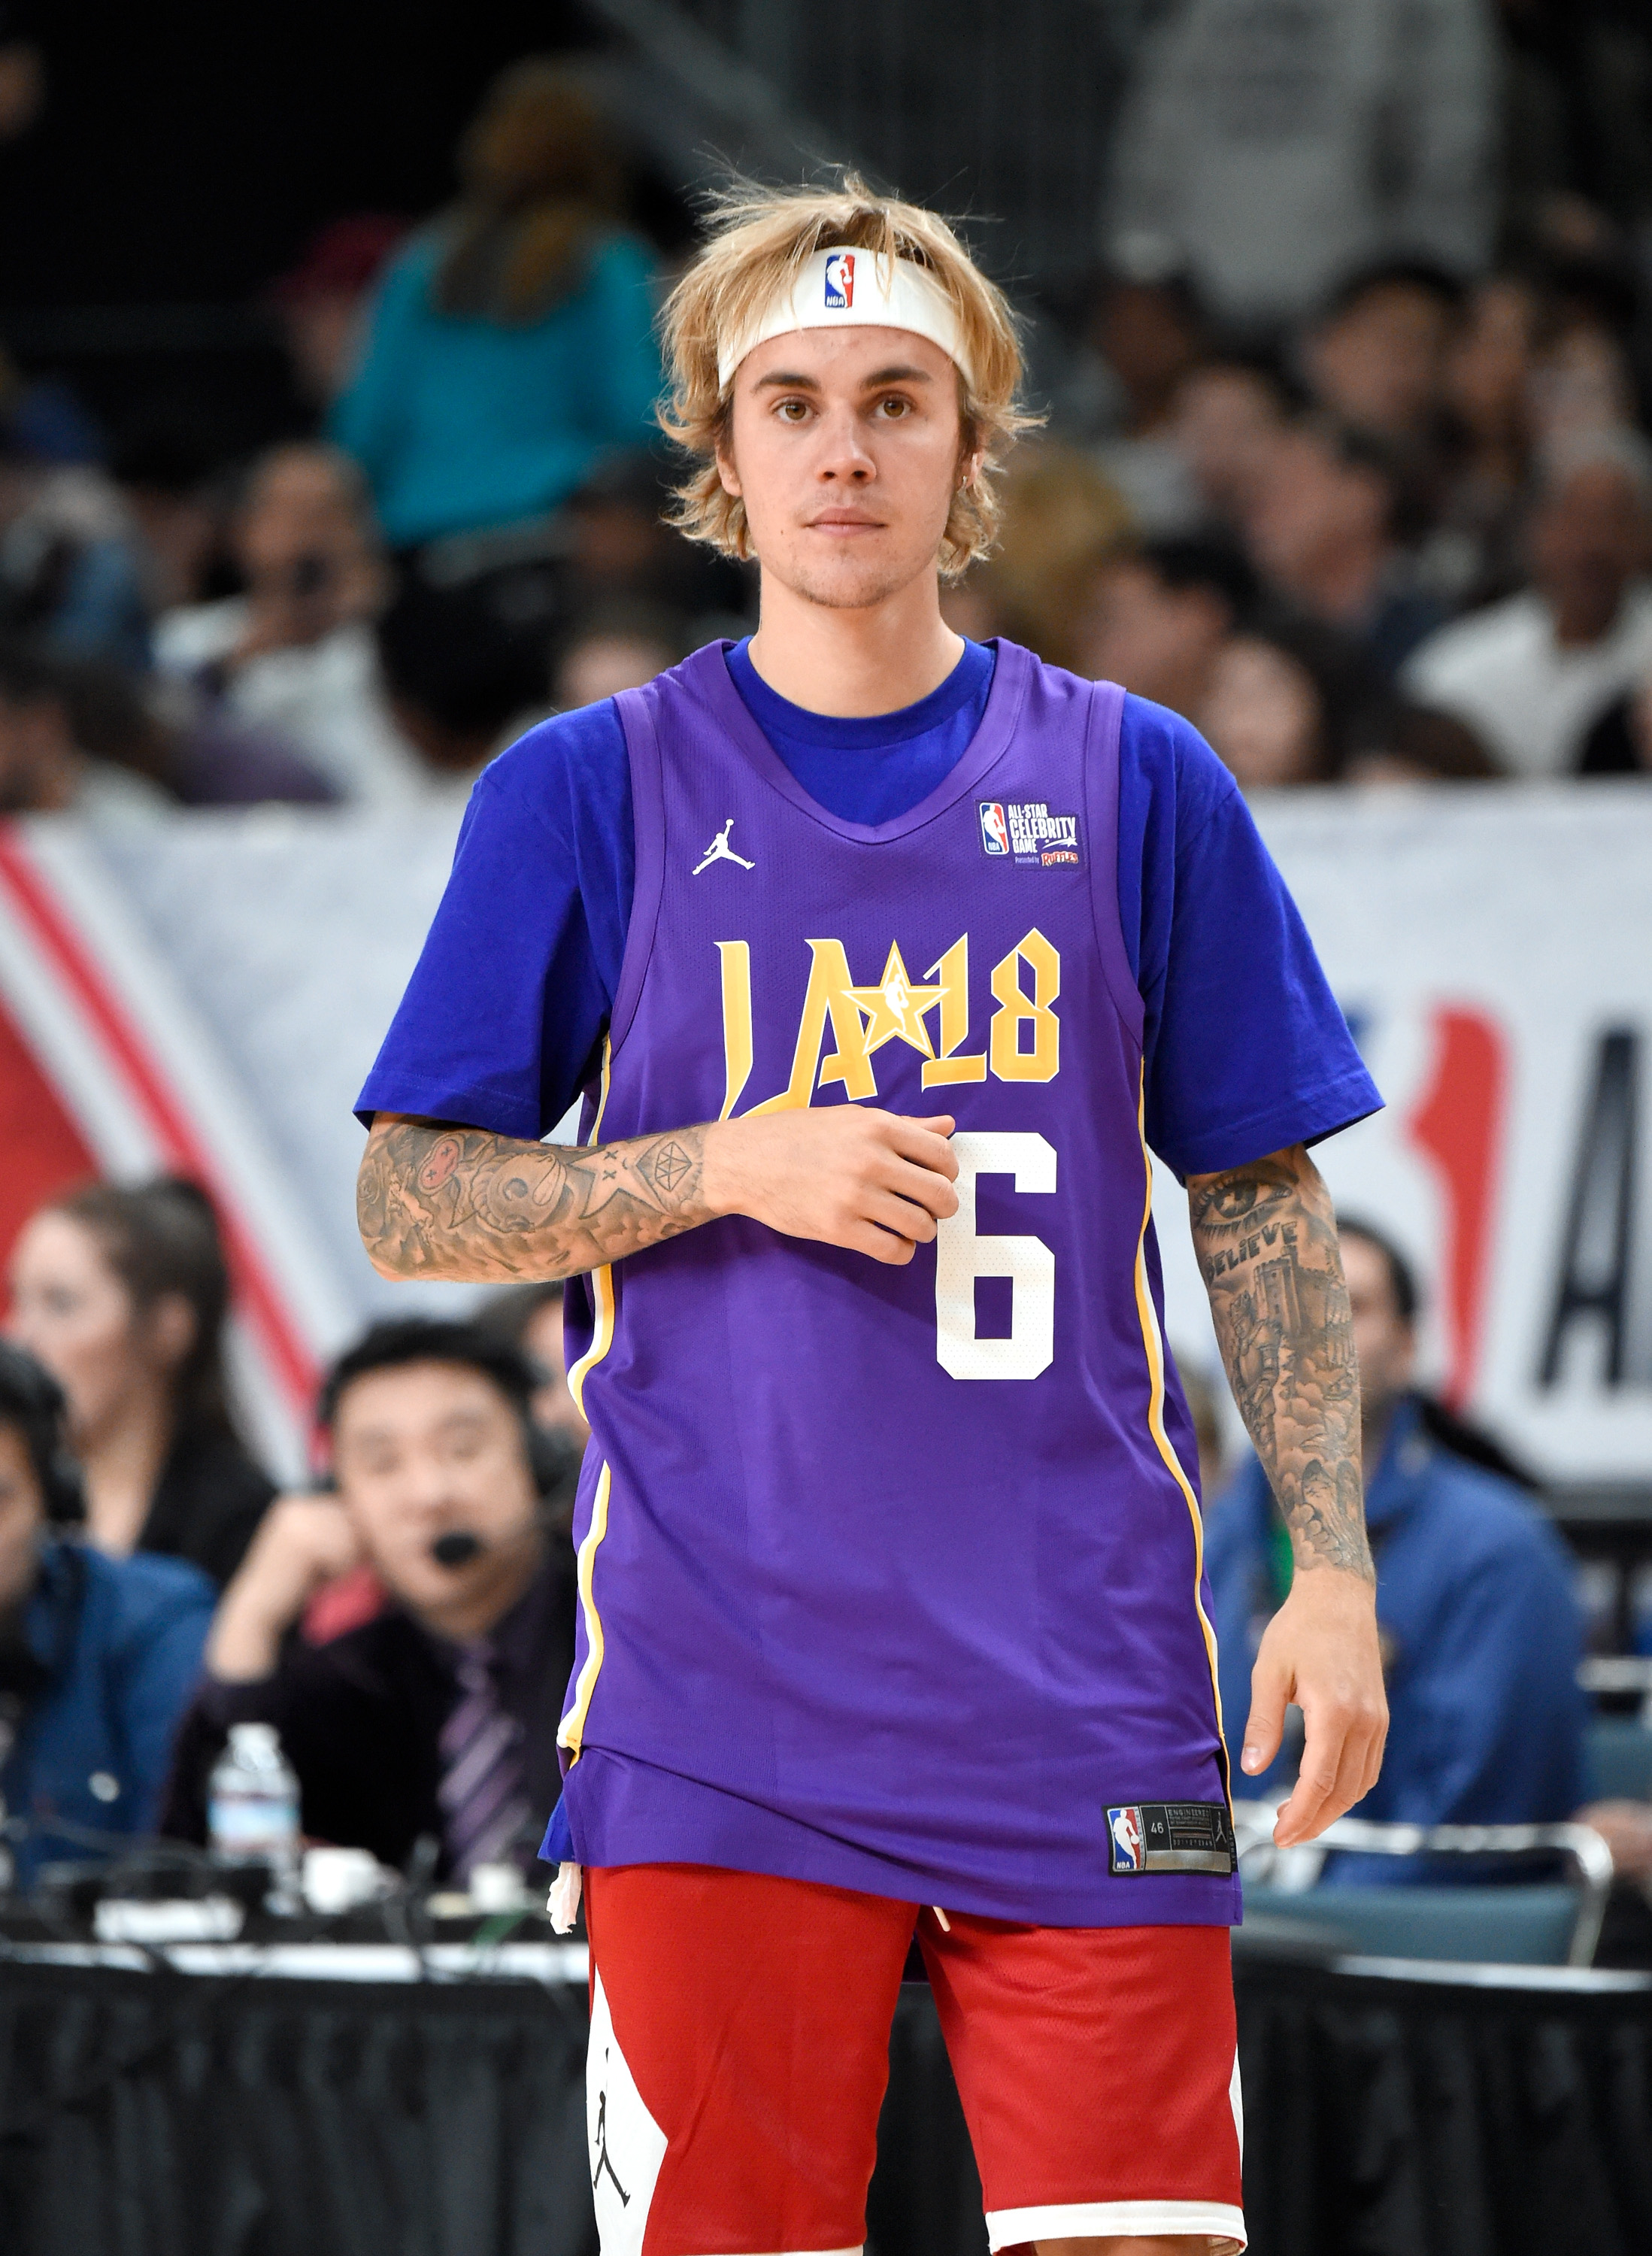 Justin Bieber attends an NBA game on February 16, 2018 | Source: Getty Images